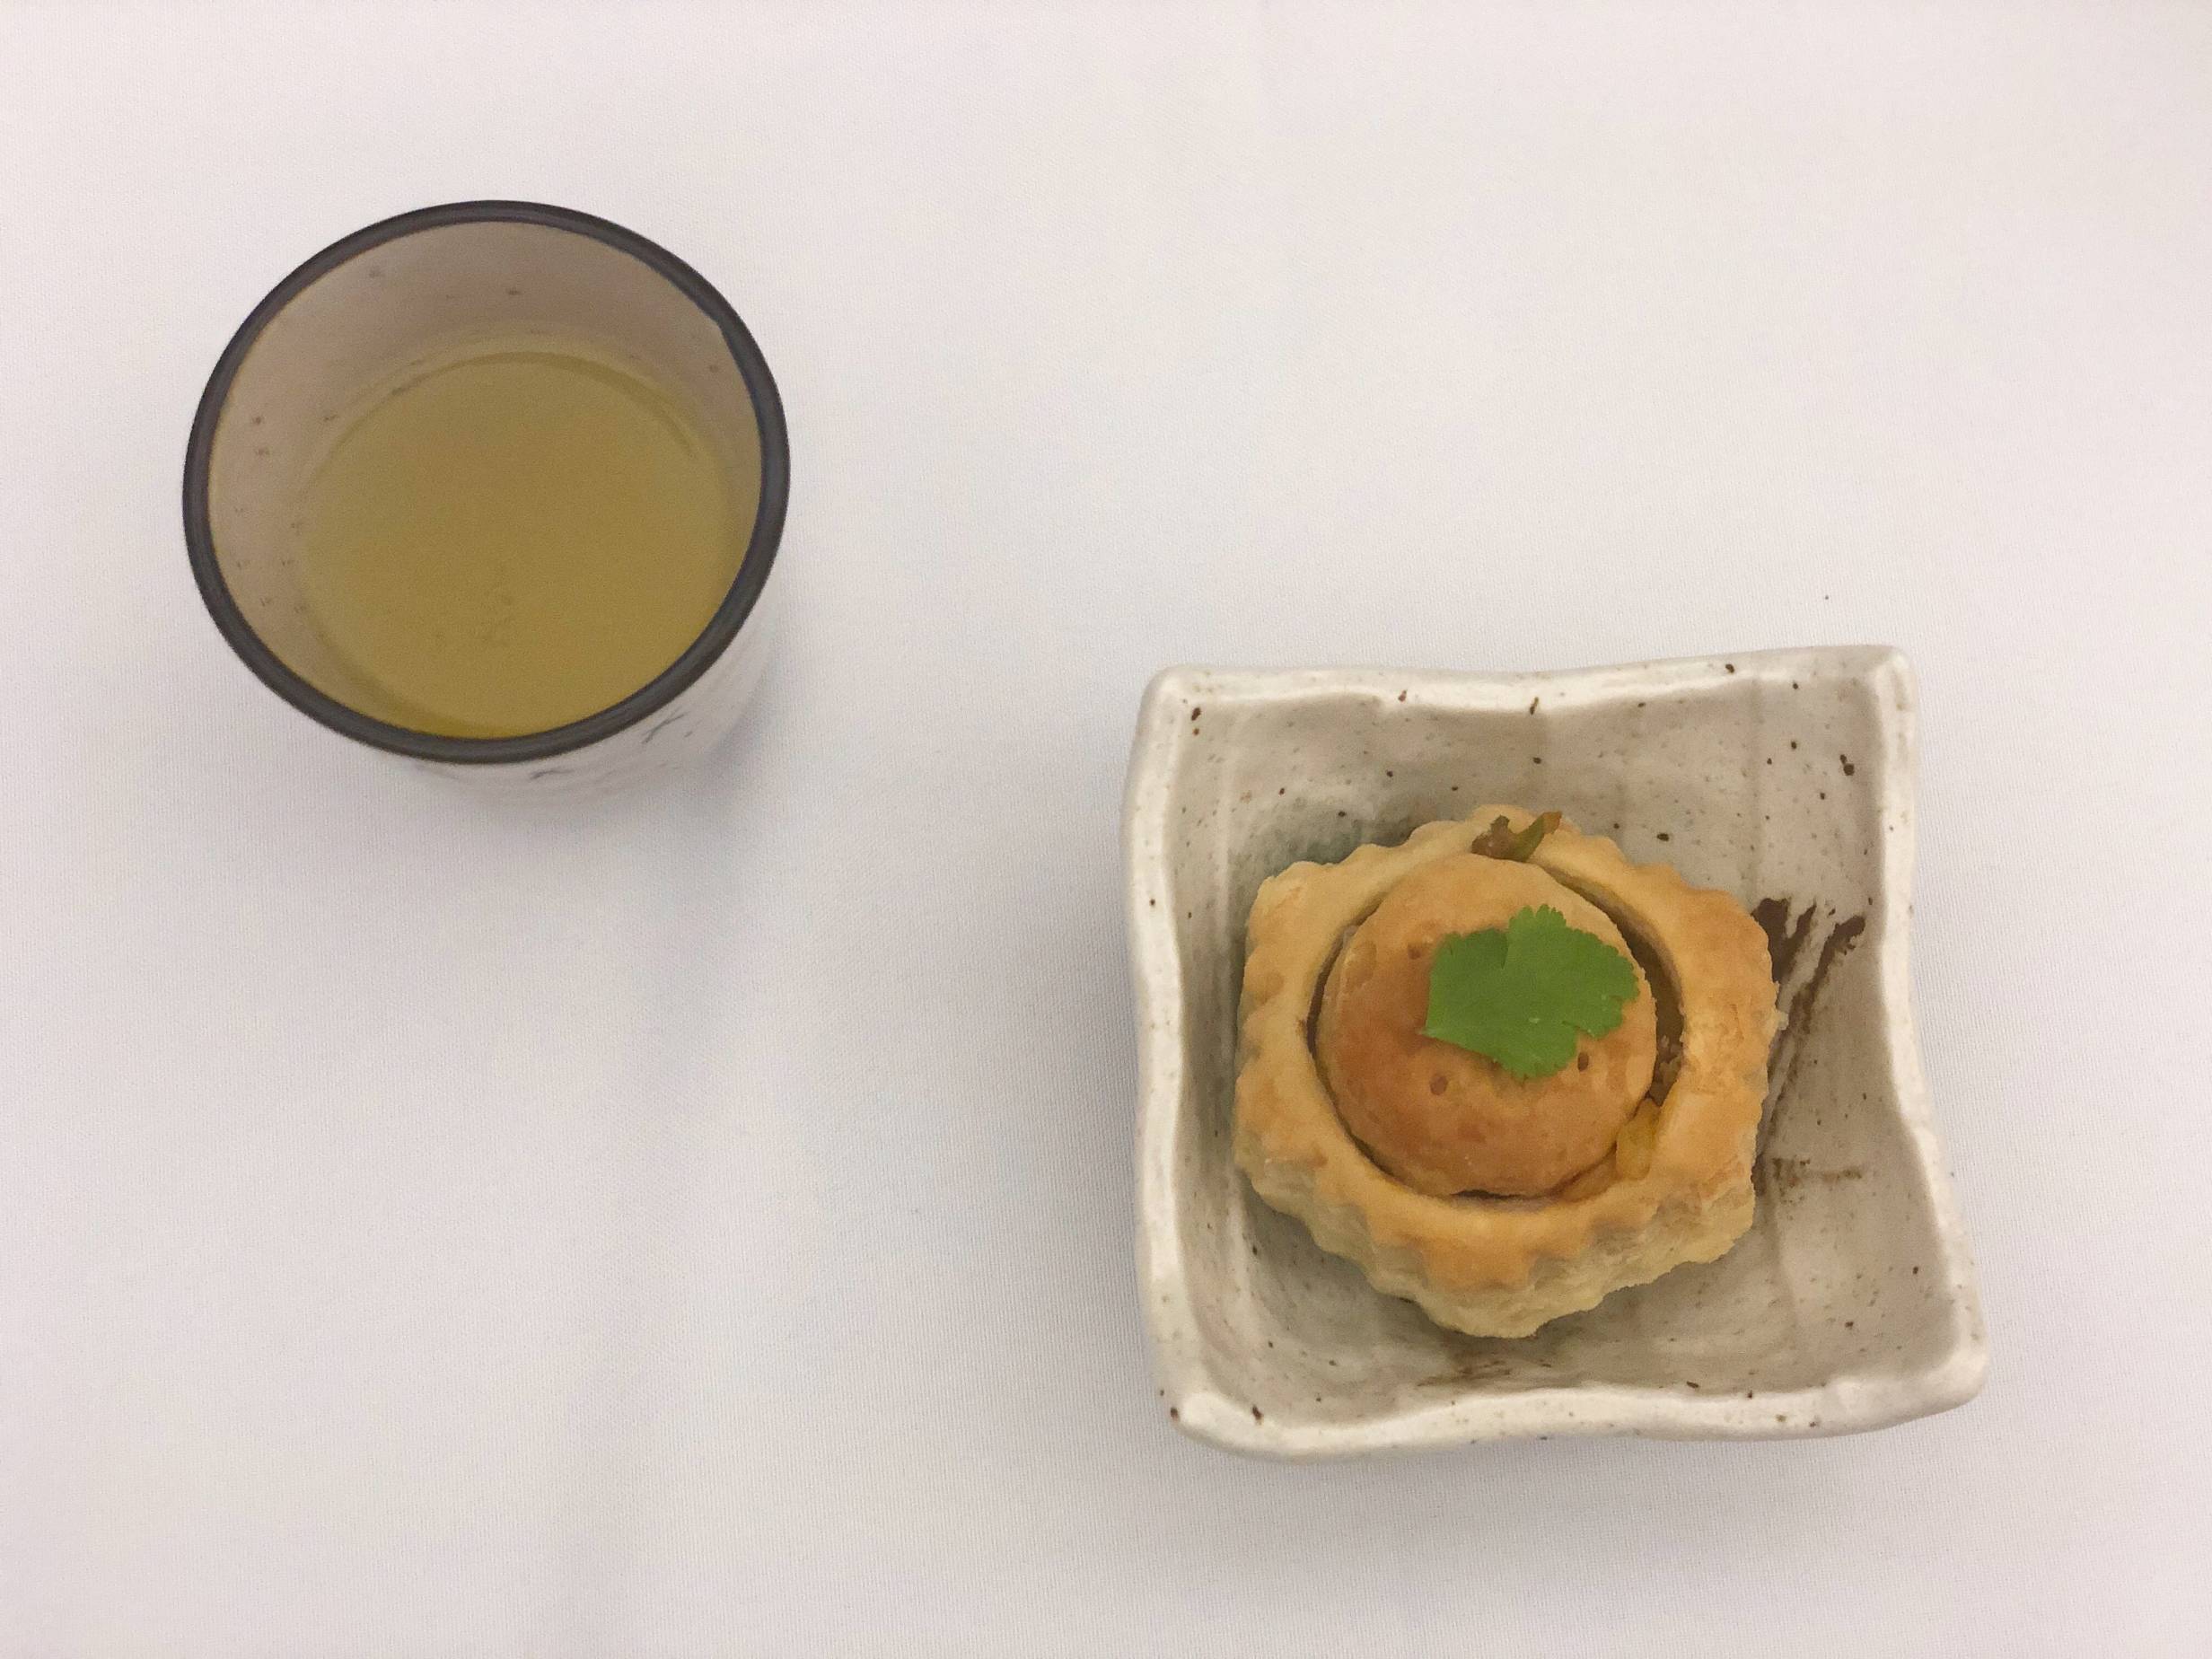 An overhead shot of a ceramic cup with lemonade and a square plate with a vegetable puff. Both are on a table with a white tablecloth. Photo by Alyssa Buckley.